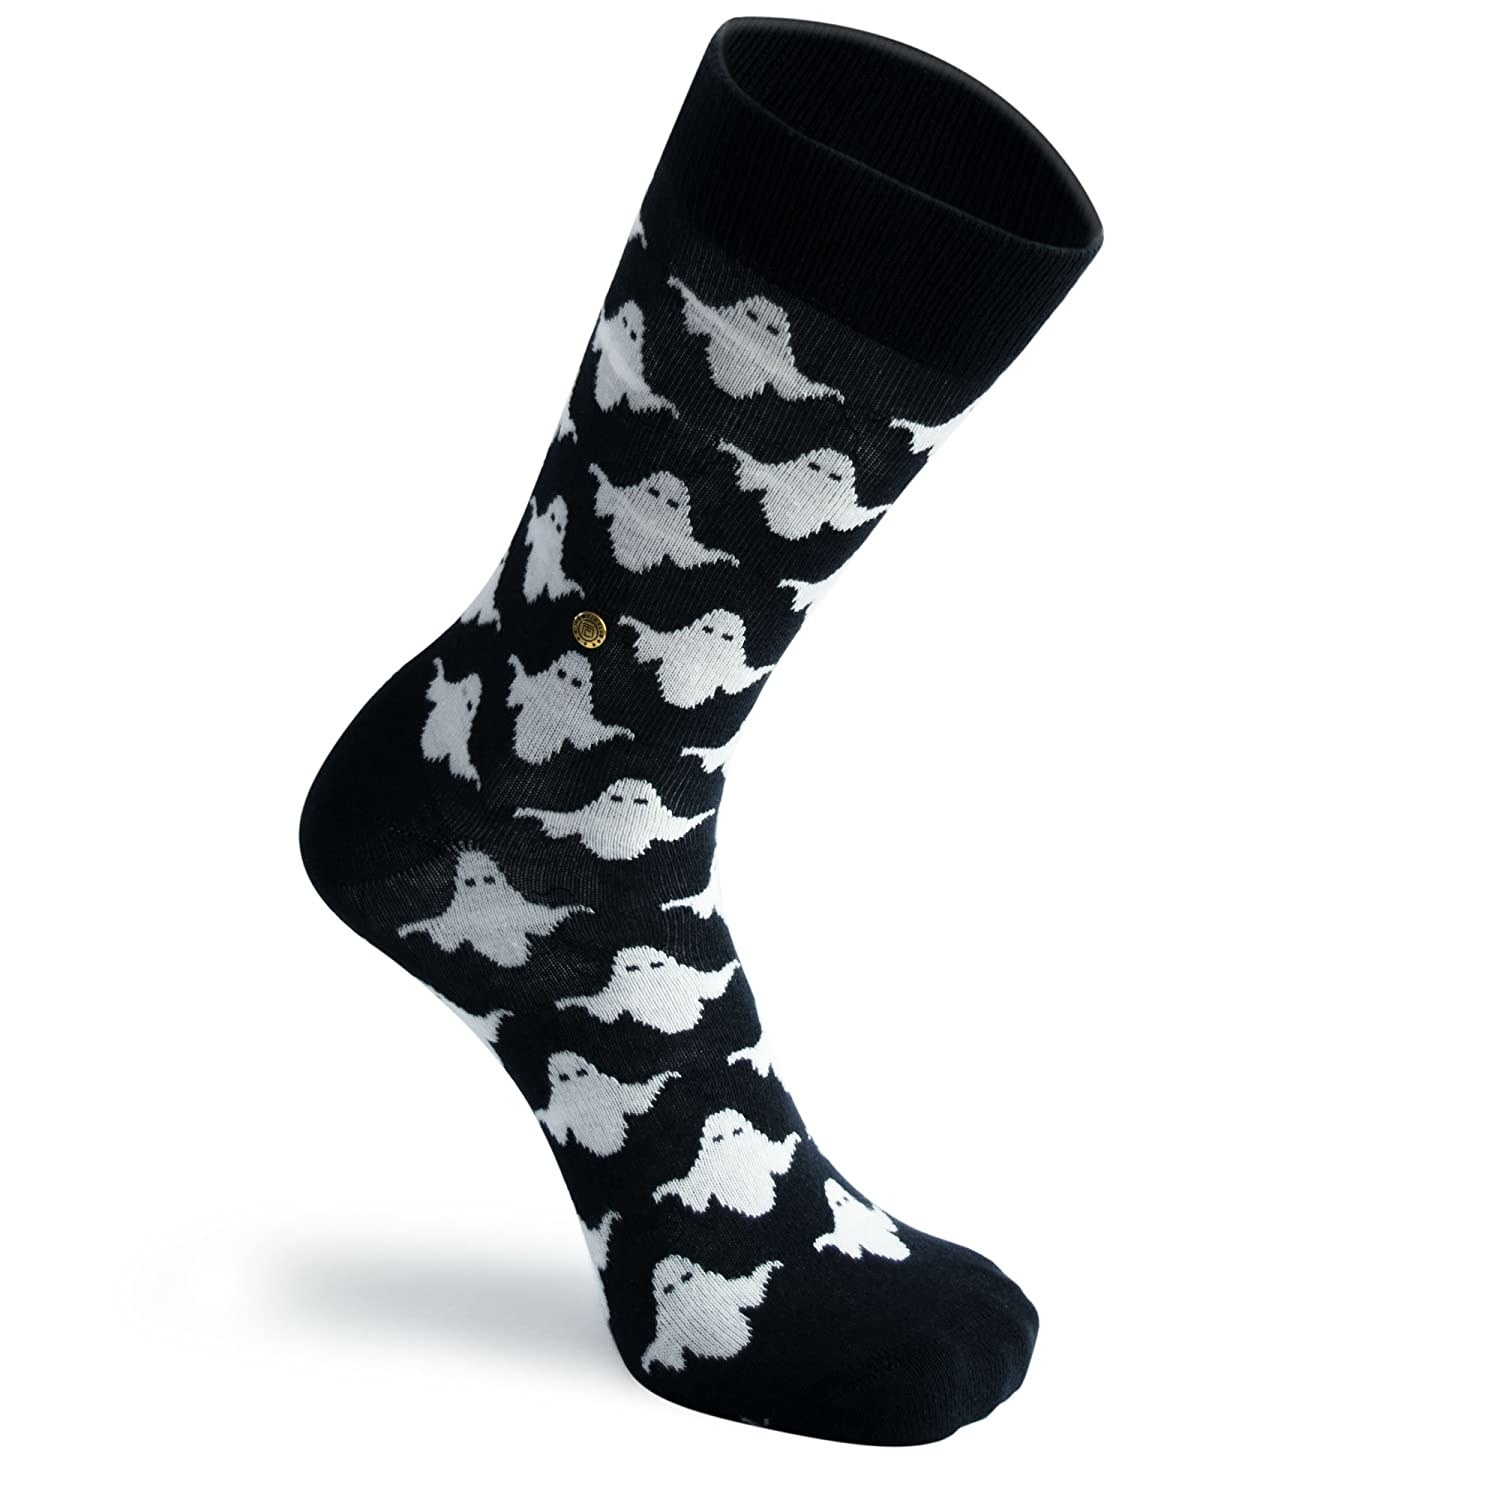 Just 15 Cool Socks You Can Get On Amazon